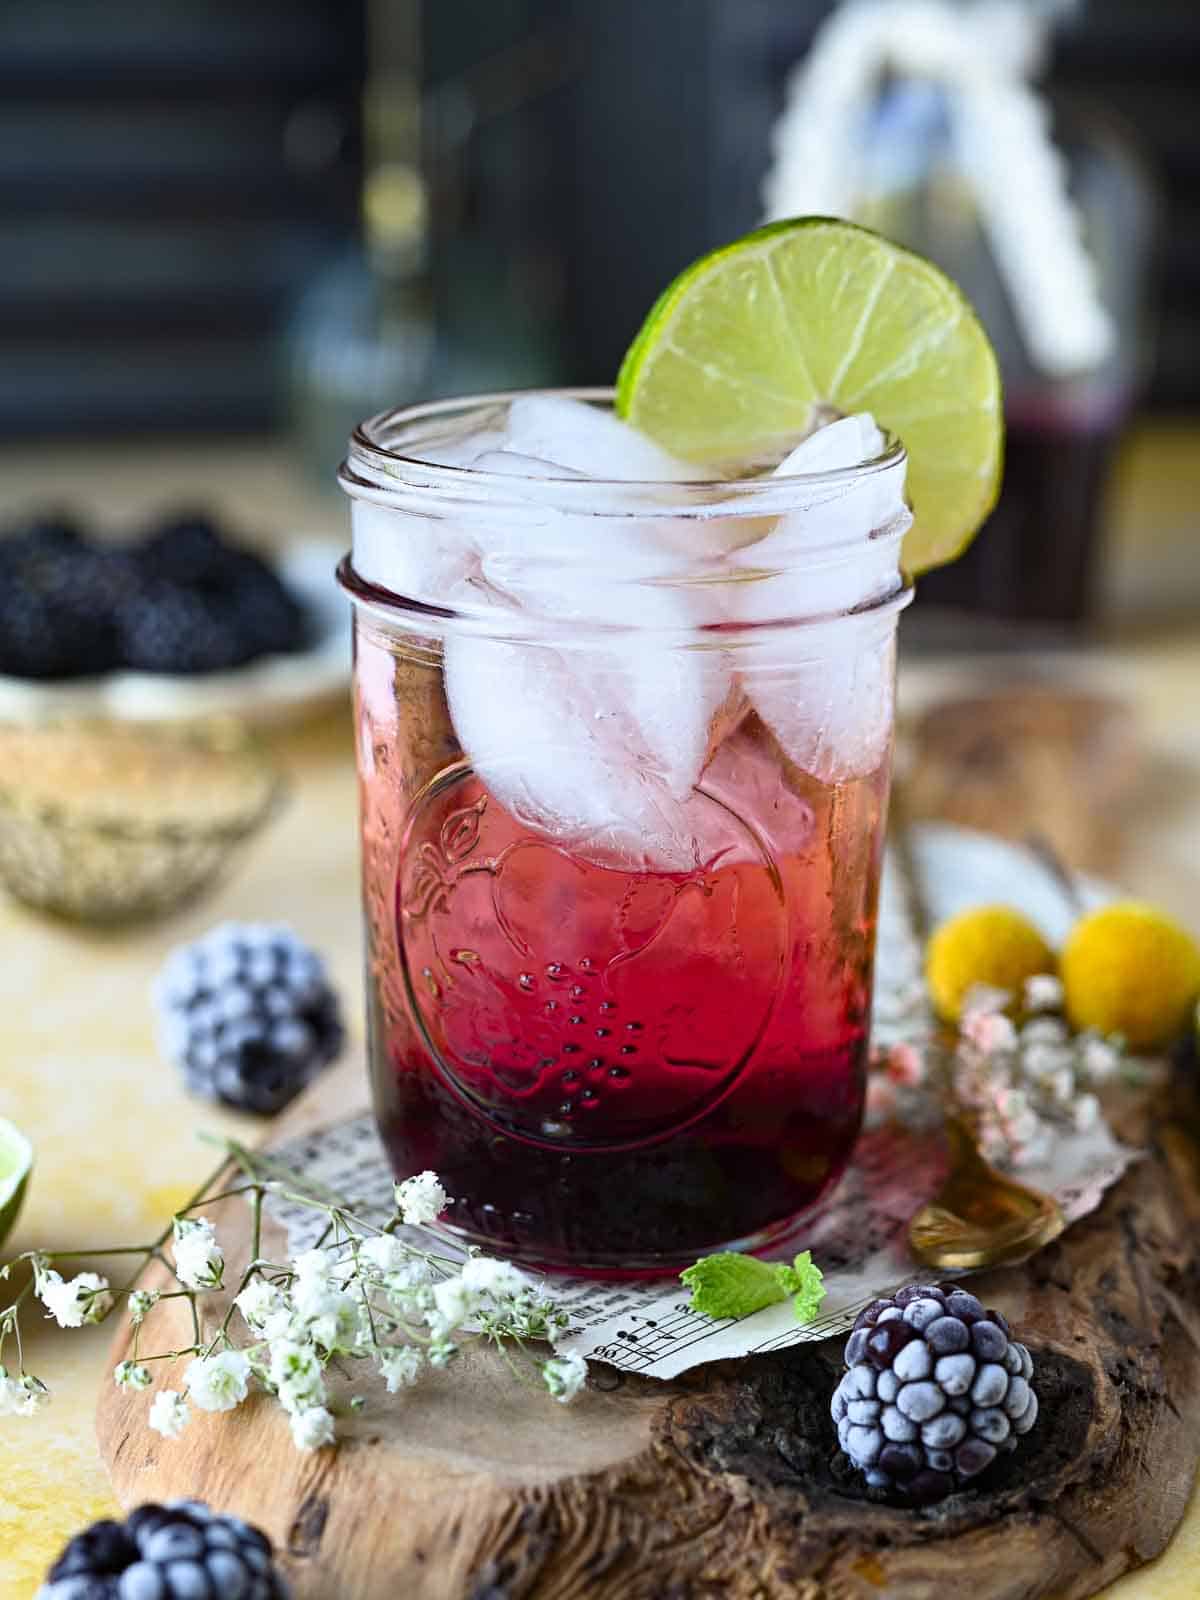 Blackberry soda in a clear glass with lime and blackberries around it.